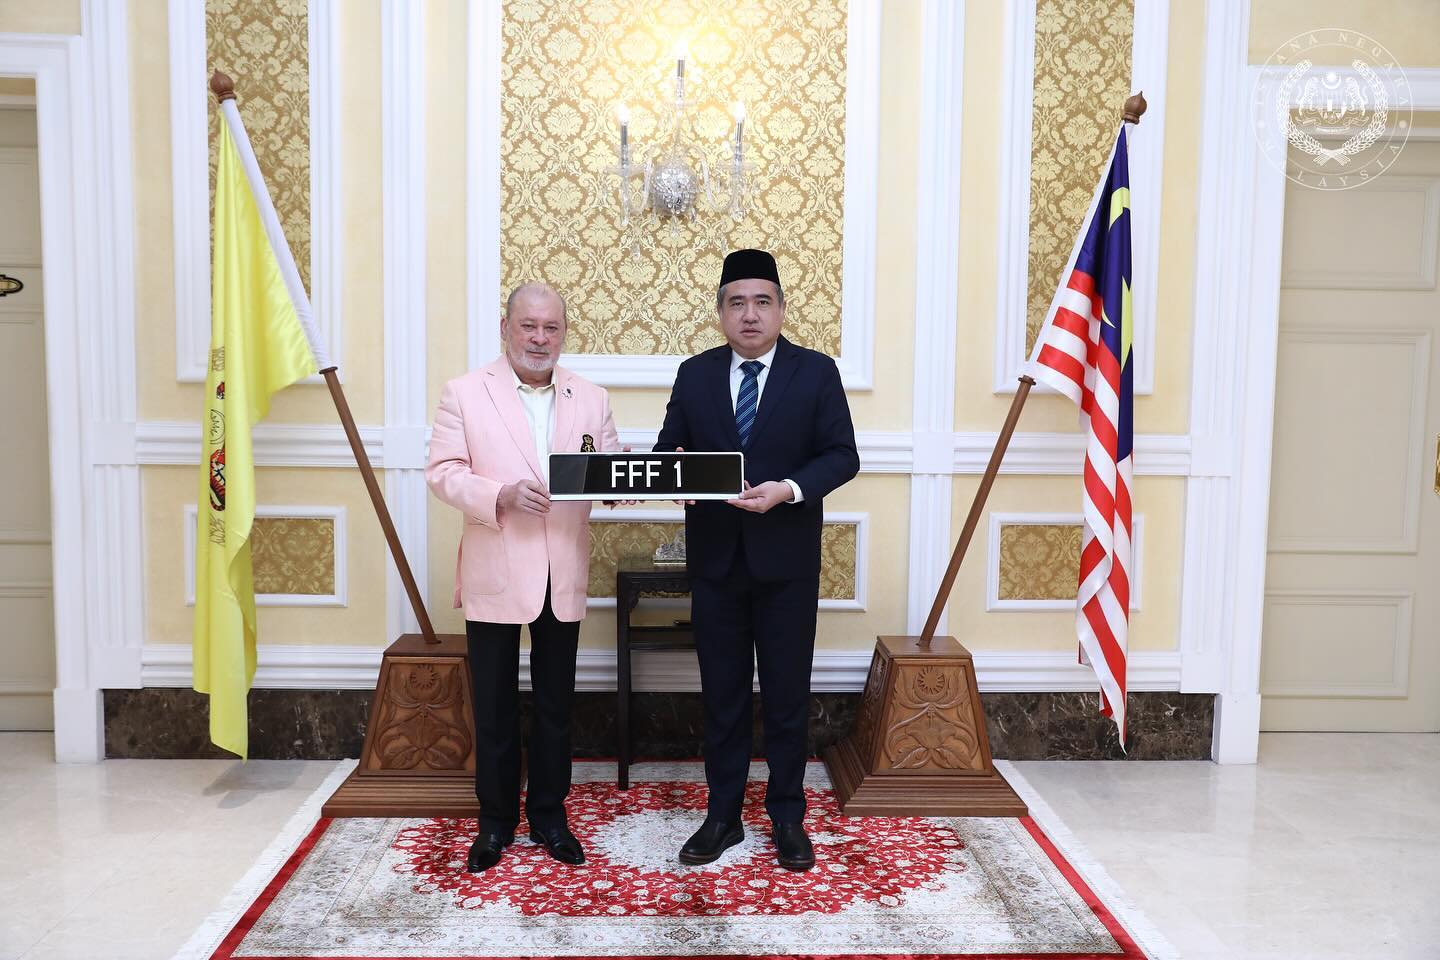 Agong receiving his fff 1 number plate